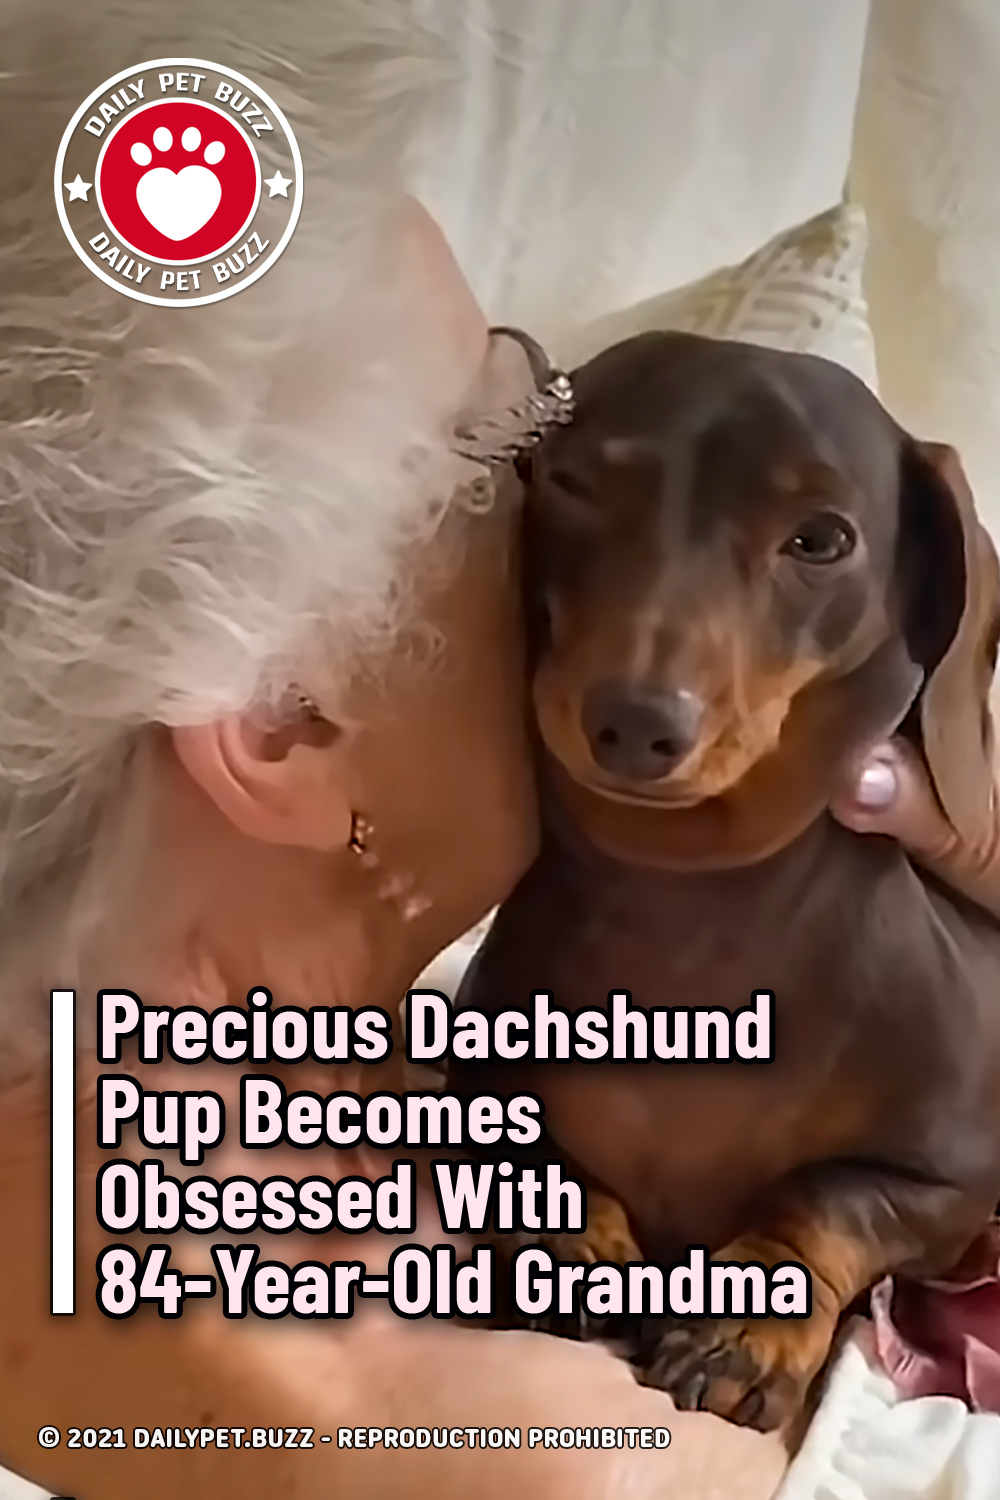 Precious Dachshund Pup Becomes Obsessed With 84-Year-Old Grandma